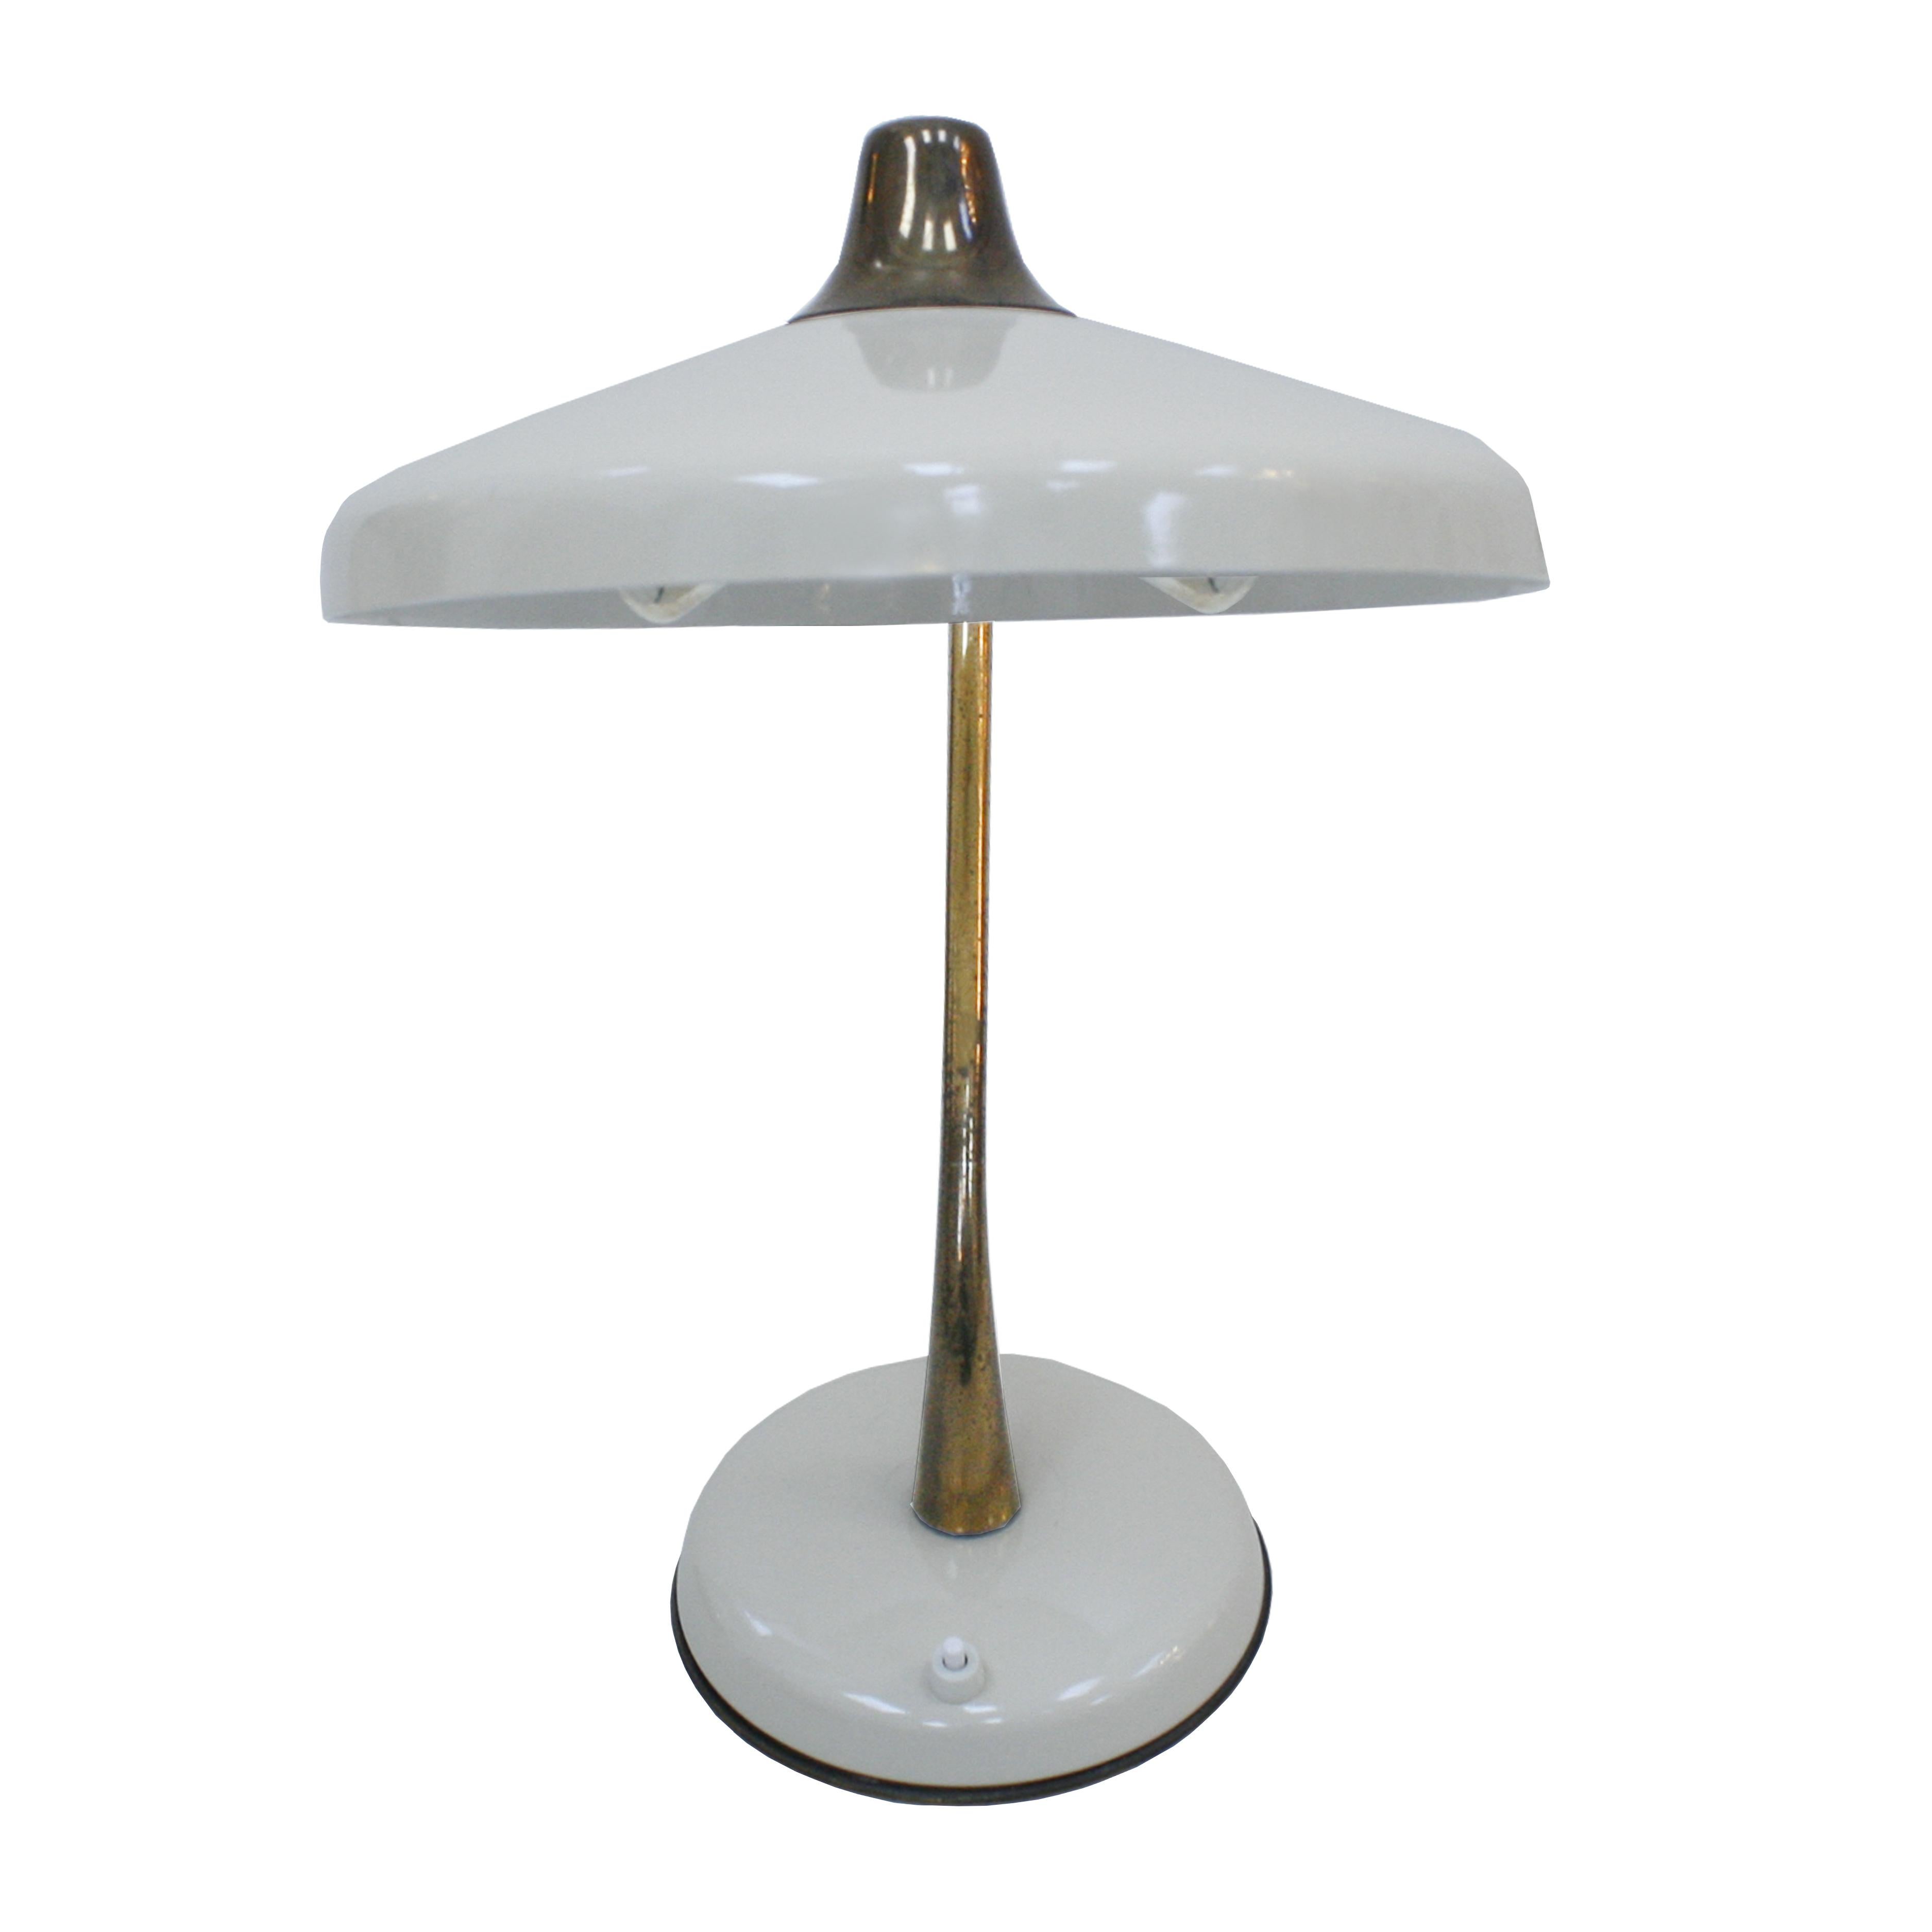 Mid-Century Modern table lamp designed by Oscar Torlasco for Lumi. Made of curved brass structure with the end in the cone shape which float, white lacquered steel lampshade and base. Composed of three bulbs. The handle as the head helps adjust the